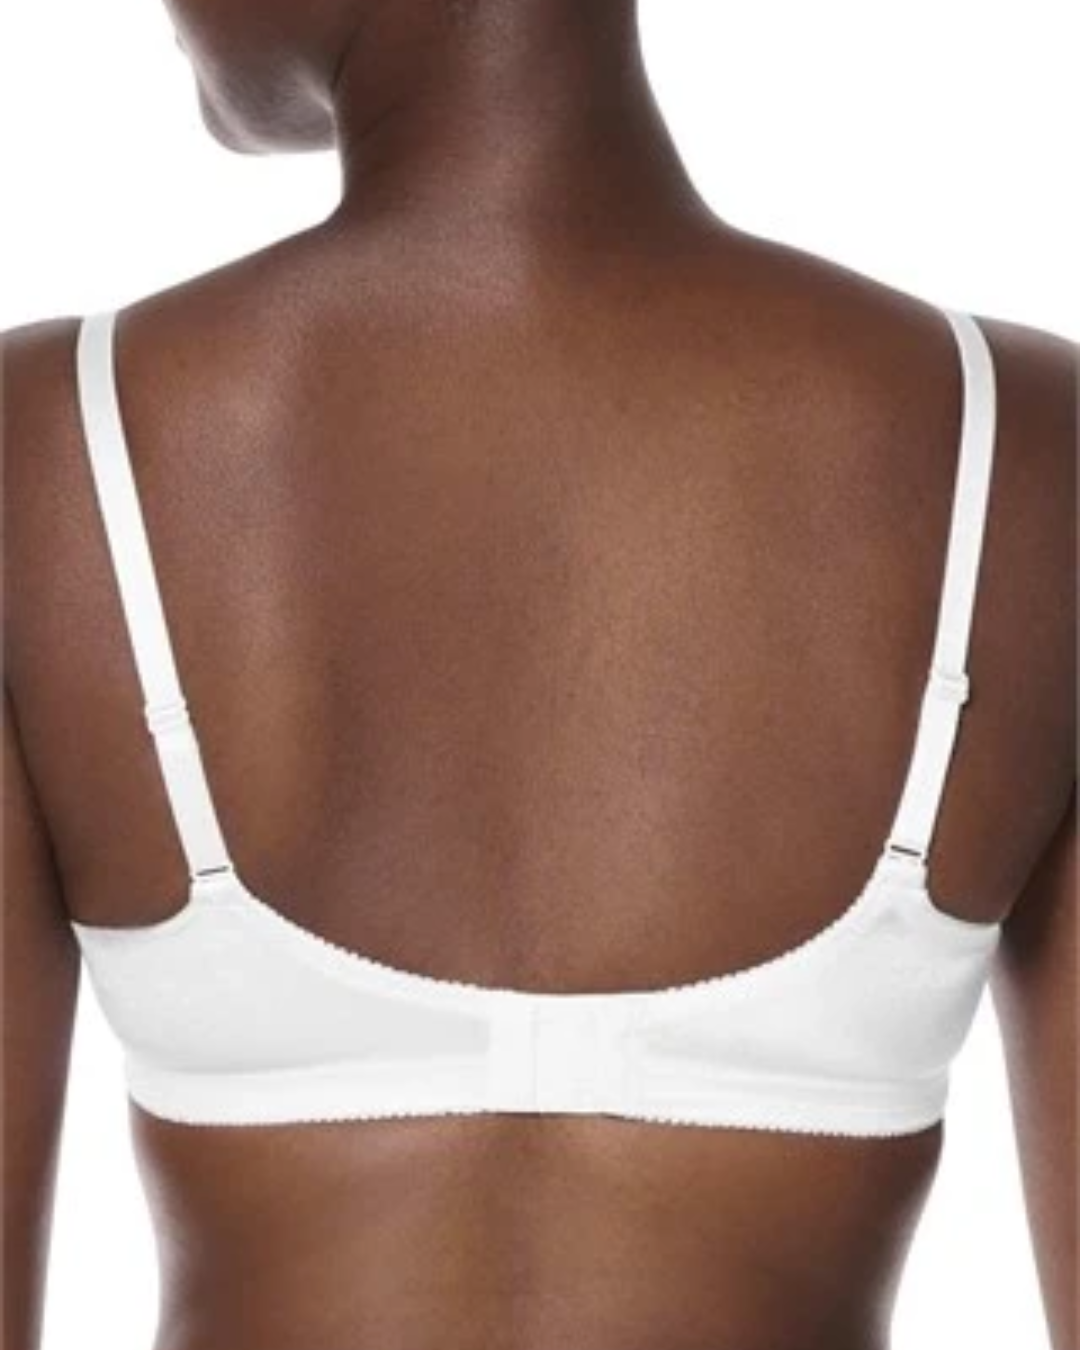 The Amoena Isabel Bra, a supportive and comfortable post-mastectomy bra designed for ultimate confidence. With bilateral pockets to hold breast forms or prostheses securely, this bra ensures a natural and balanced silhouette. The Isabel Bra features soft fabric, adjustable straps, and a seamless design for a smooth and gentle fit. Trust in the Amoena Isabel Bra for exceptional support and comfort throughout the day